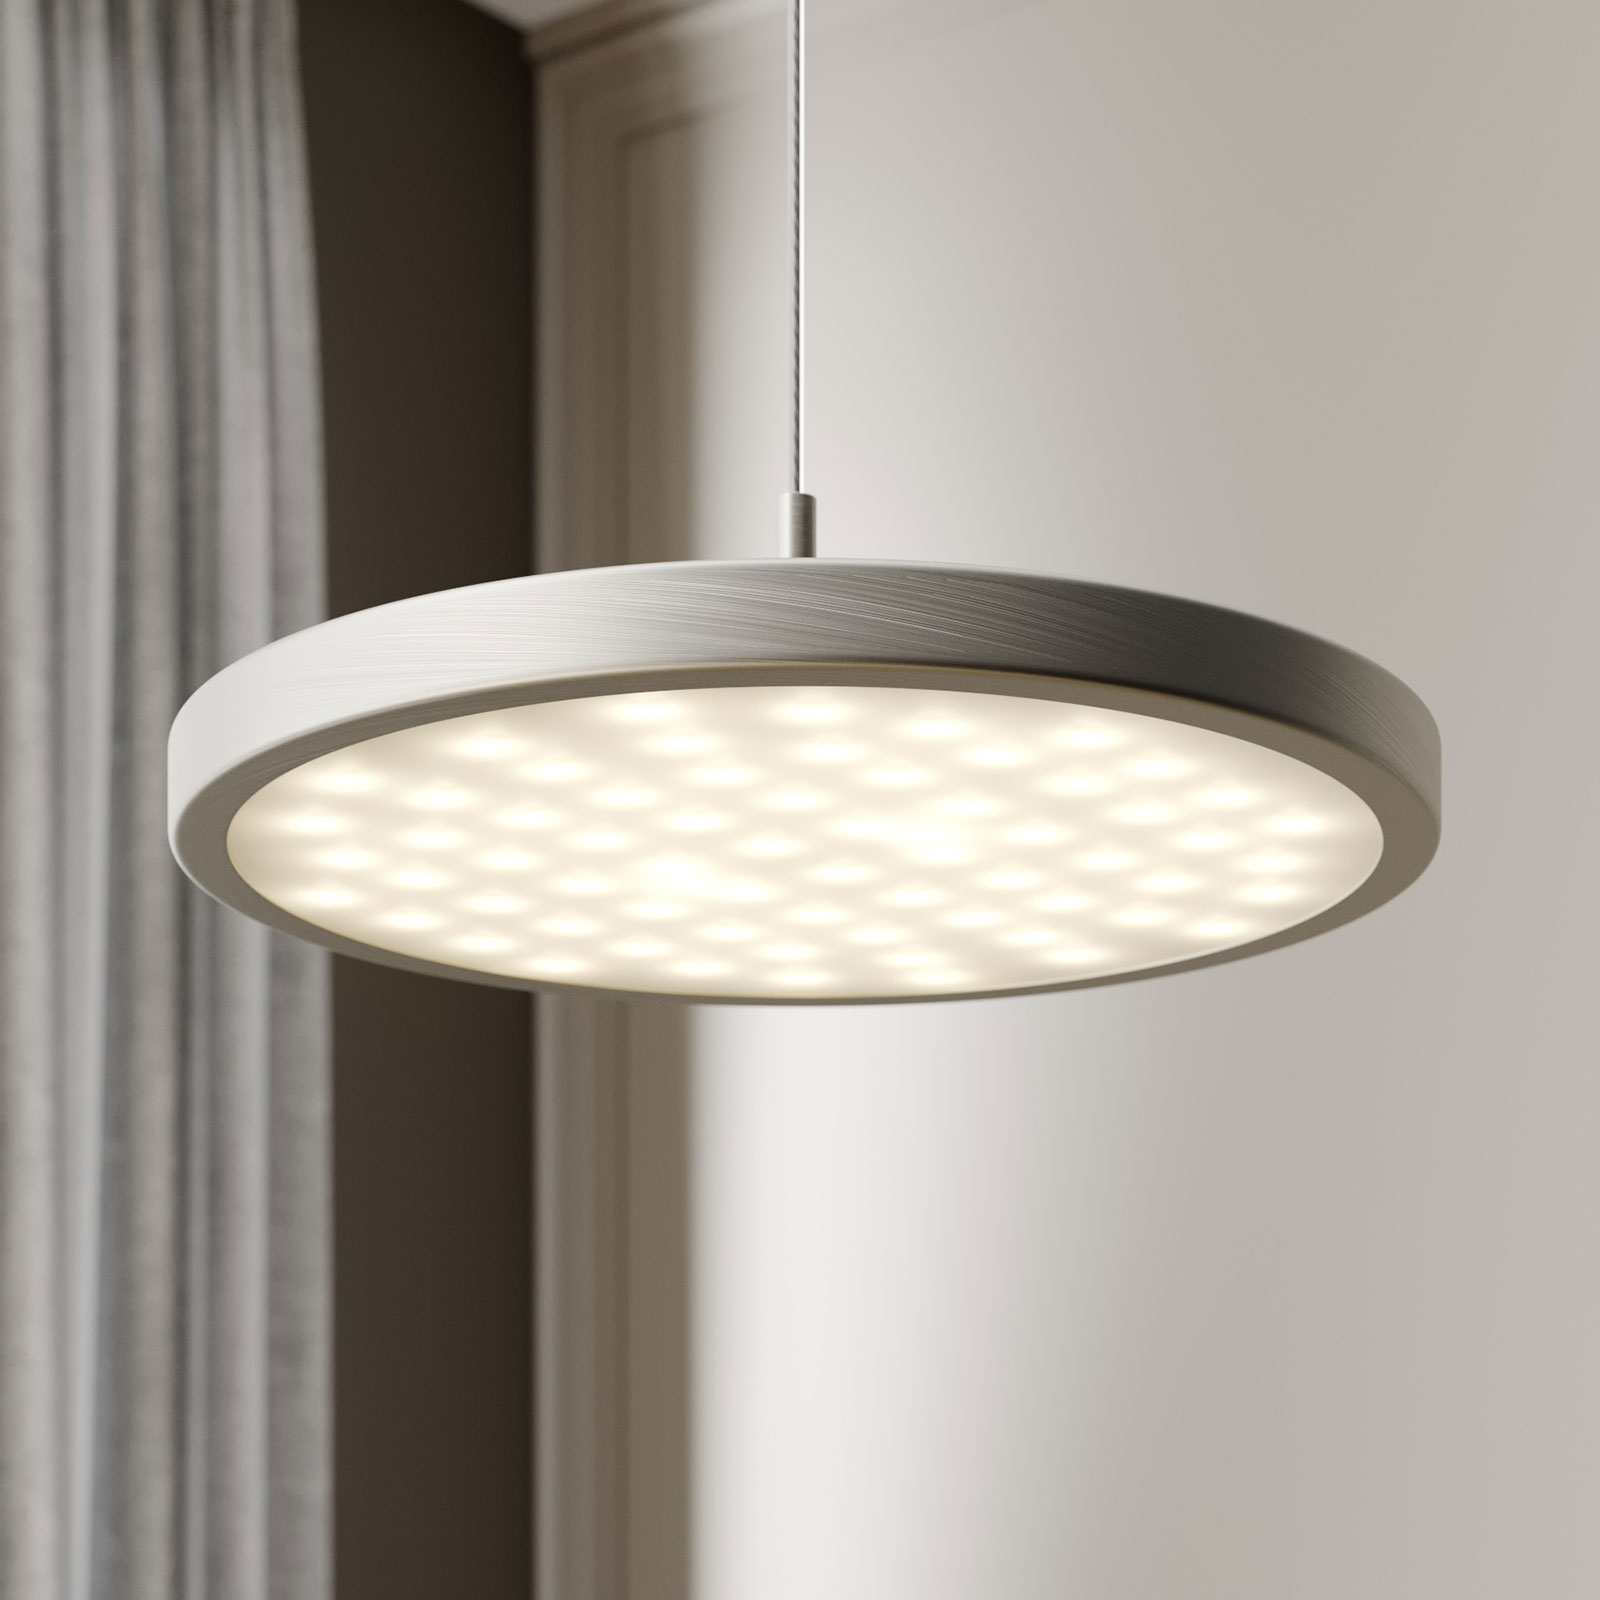 Rothfels Gion LED sospensione 1 luce nichel/rovere